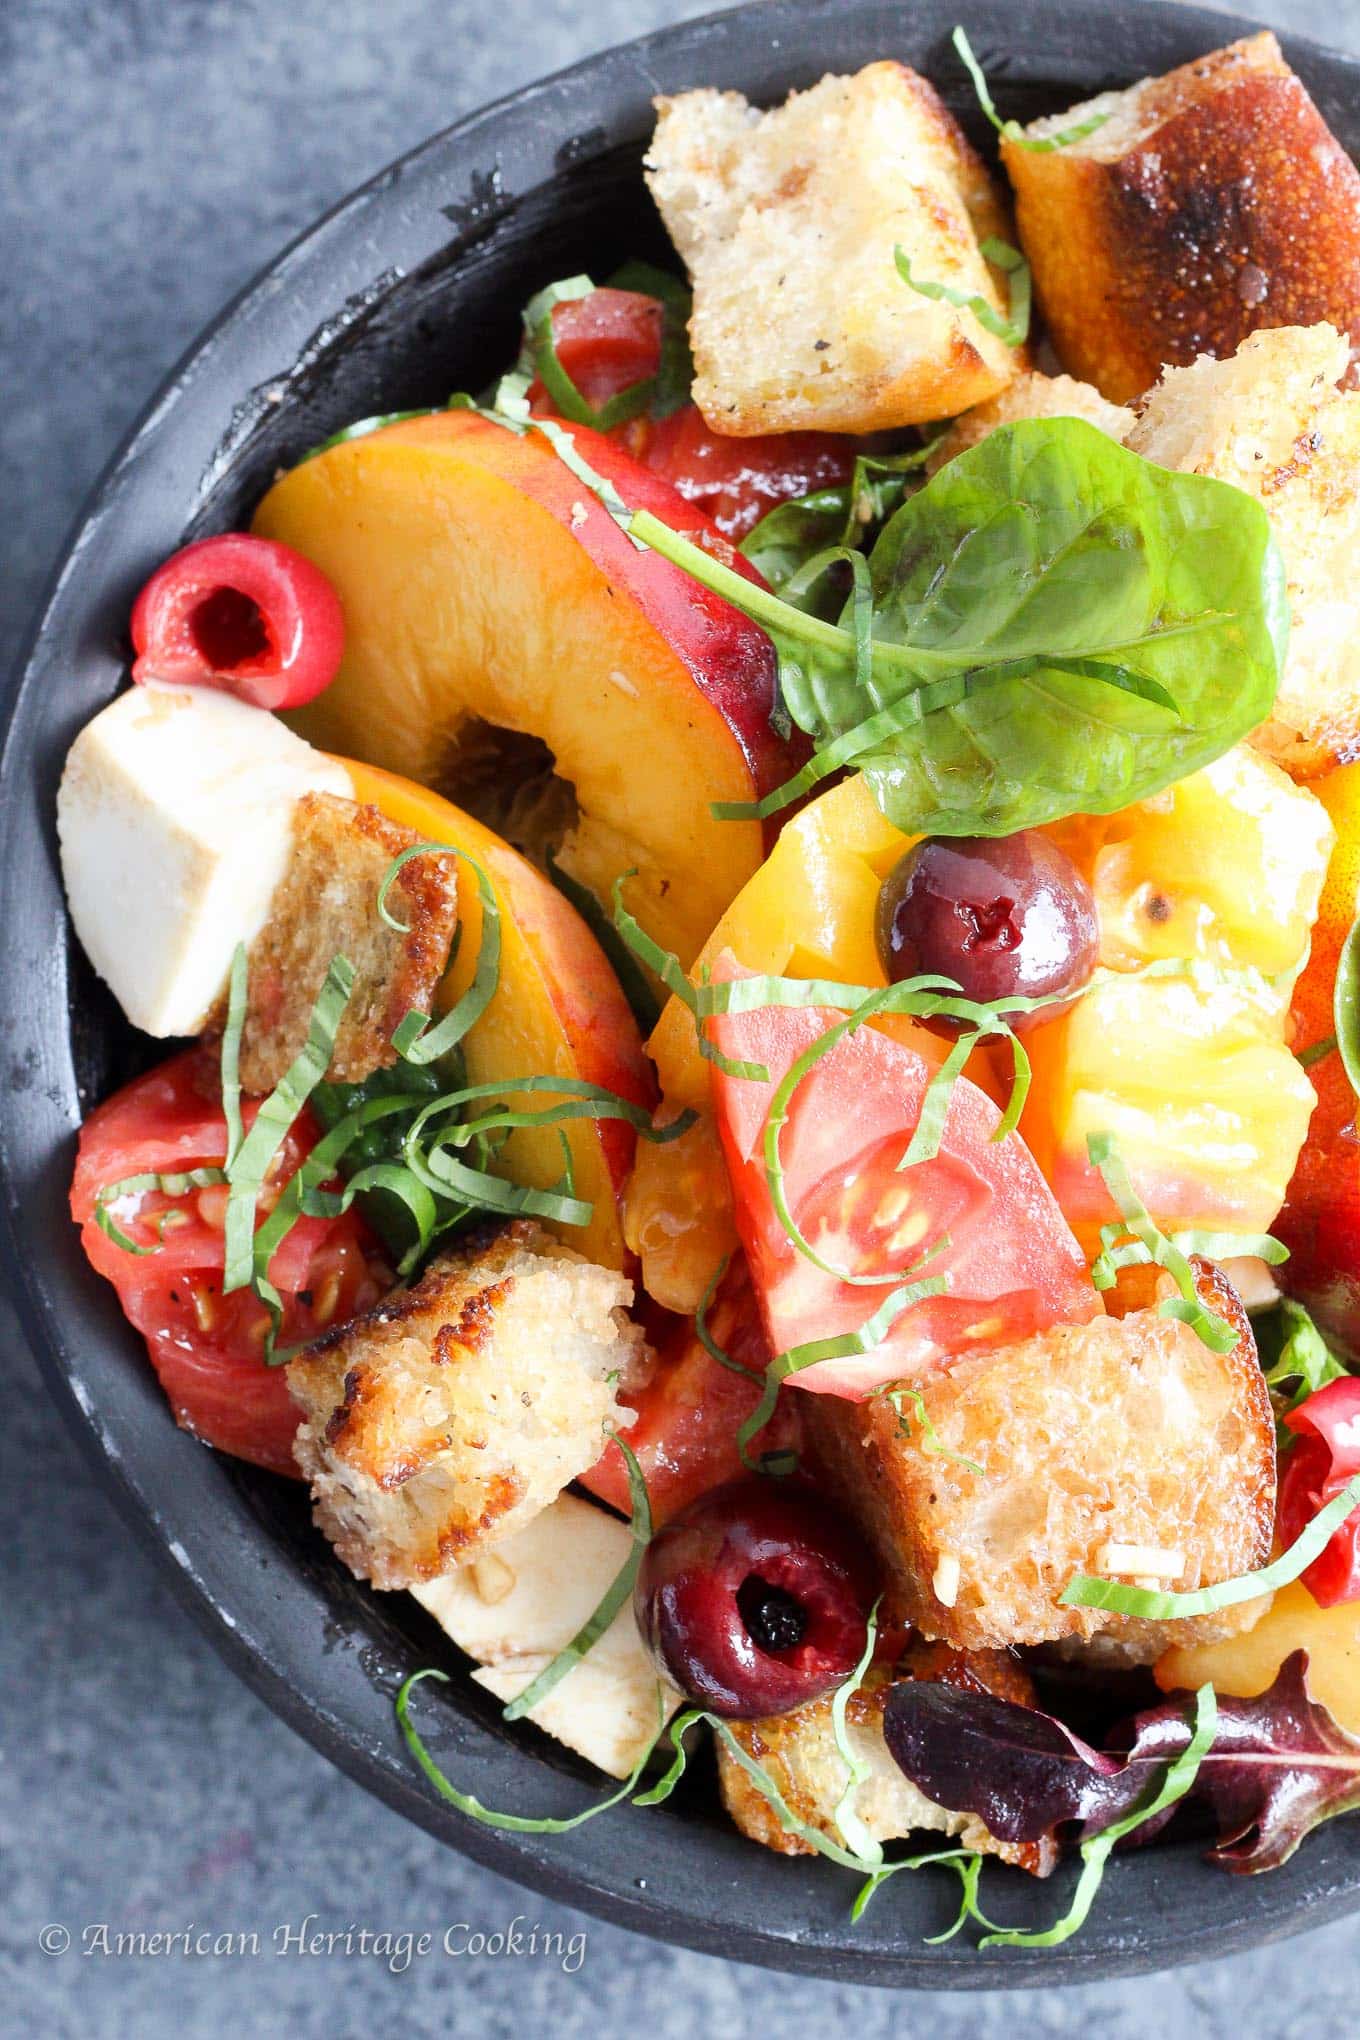 There is nothing better than taking all of Summer’s bounty and throwing it into an easy, no-oven salad! This Stone Fruit Caprese Panzanella Salad is at once familiar and comforting with a hint of the unexpected! 